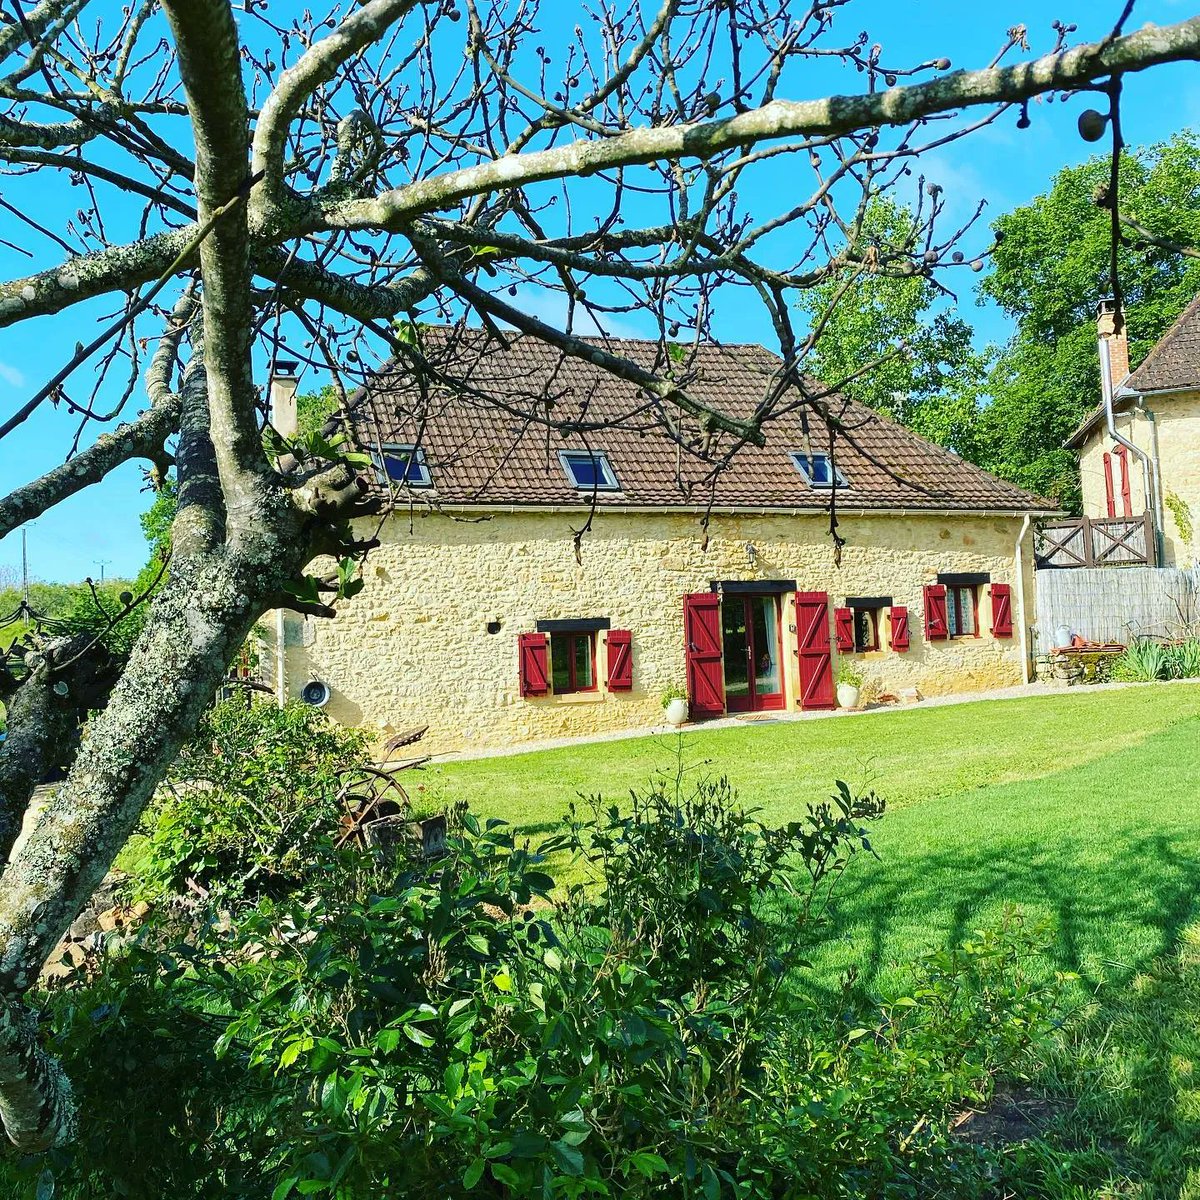 Welcome to Le Gite de Pereyroux, a perfectly positioned holiday Gite with private heated swimming pool located between Sarlat and Rocamadour. giteworld.com/holiday-rental…  
.
#giteworld #gite #gites #gitesinfrance #frenchgites #france #frenchproperty #holidayrentals #propertyabroad